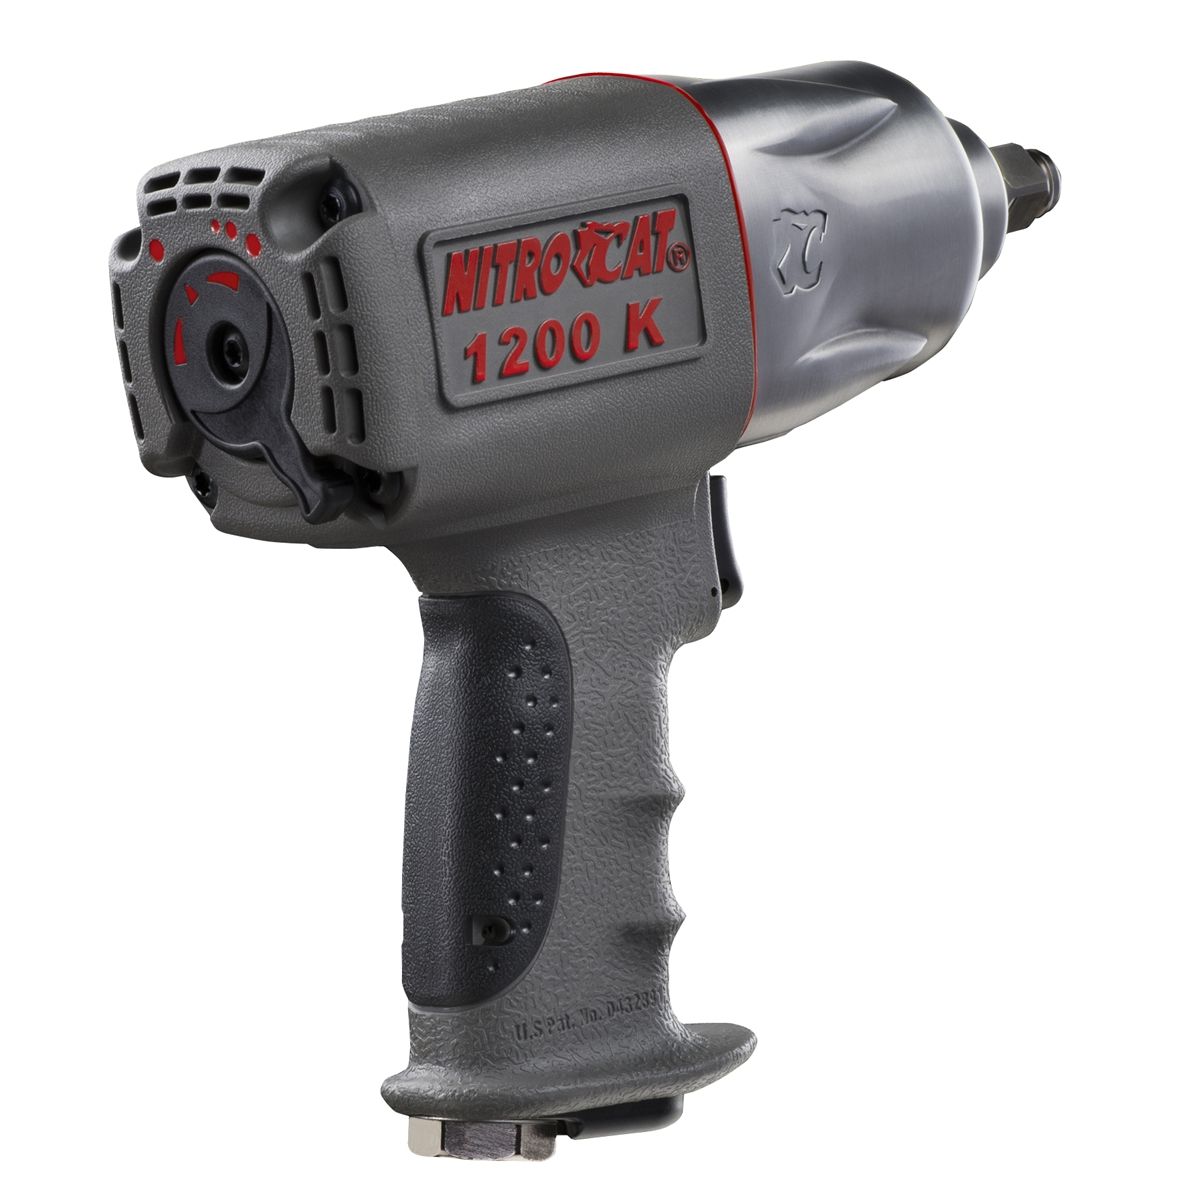 1/2 Inch NitroCat Kevlar Composite air Impact Wrench